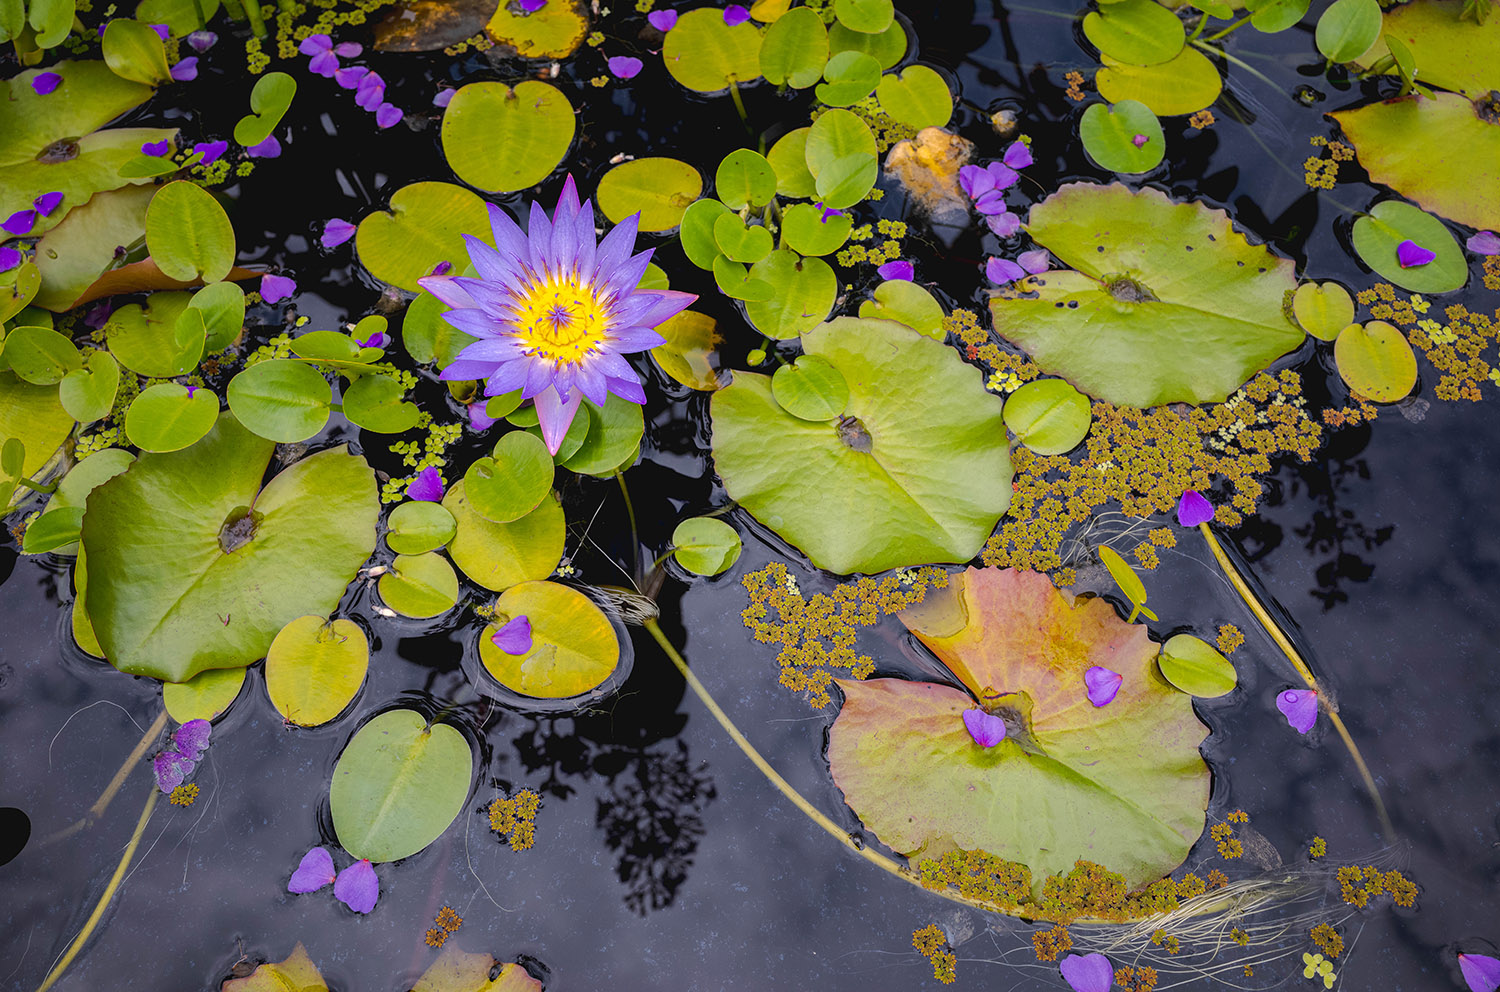 A bright purple flower with a yellow center blooms above the surface of the water, which is covered in round green lily pads